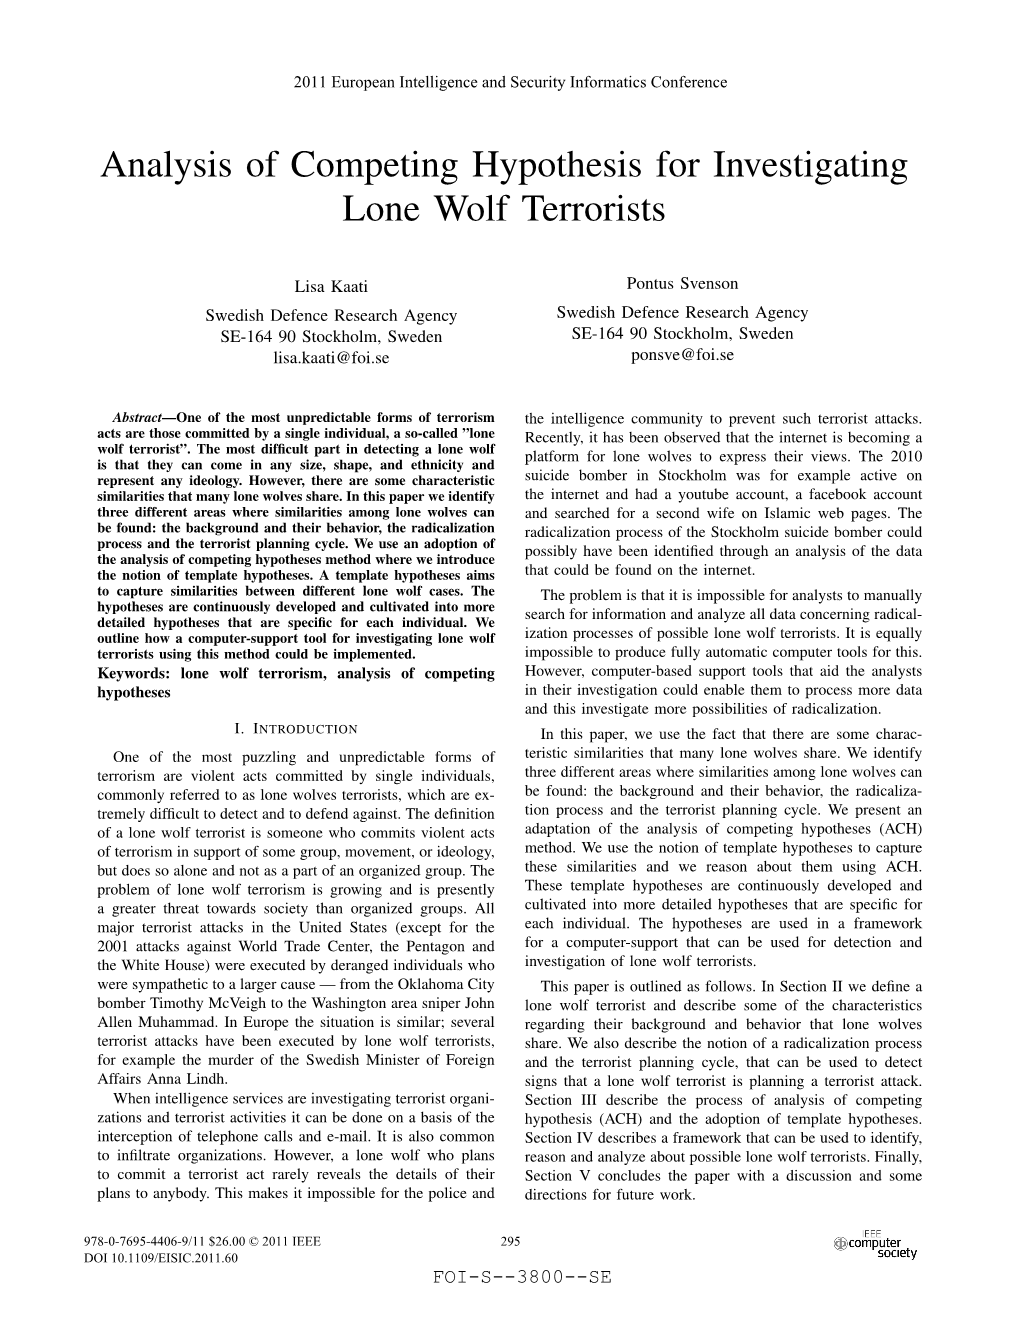 Analysis of Competing Hypothesis for Investigating Lone Wolf Terrorists